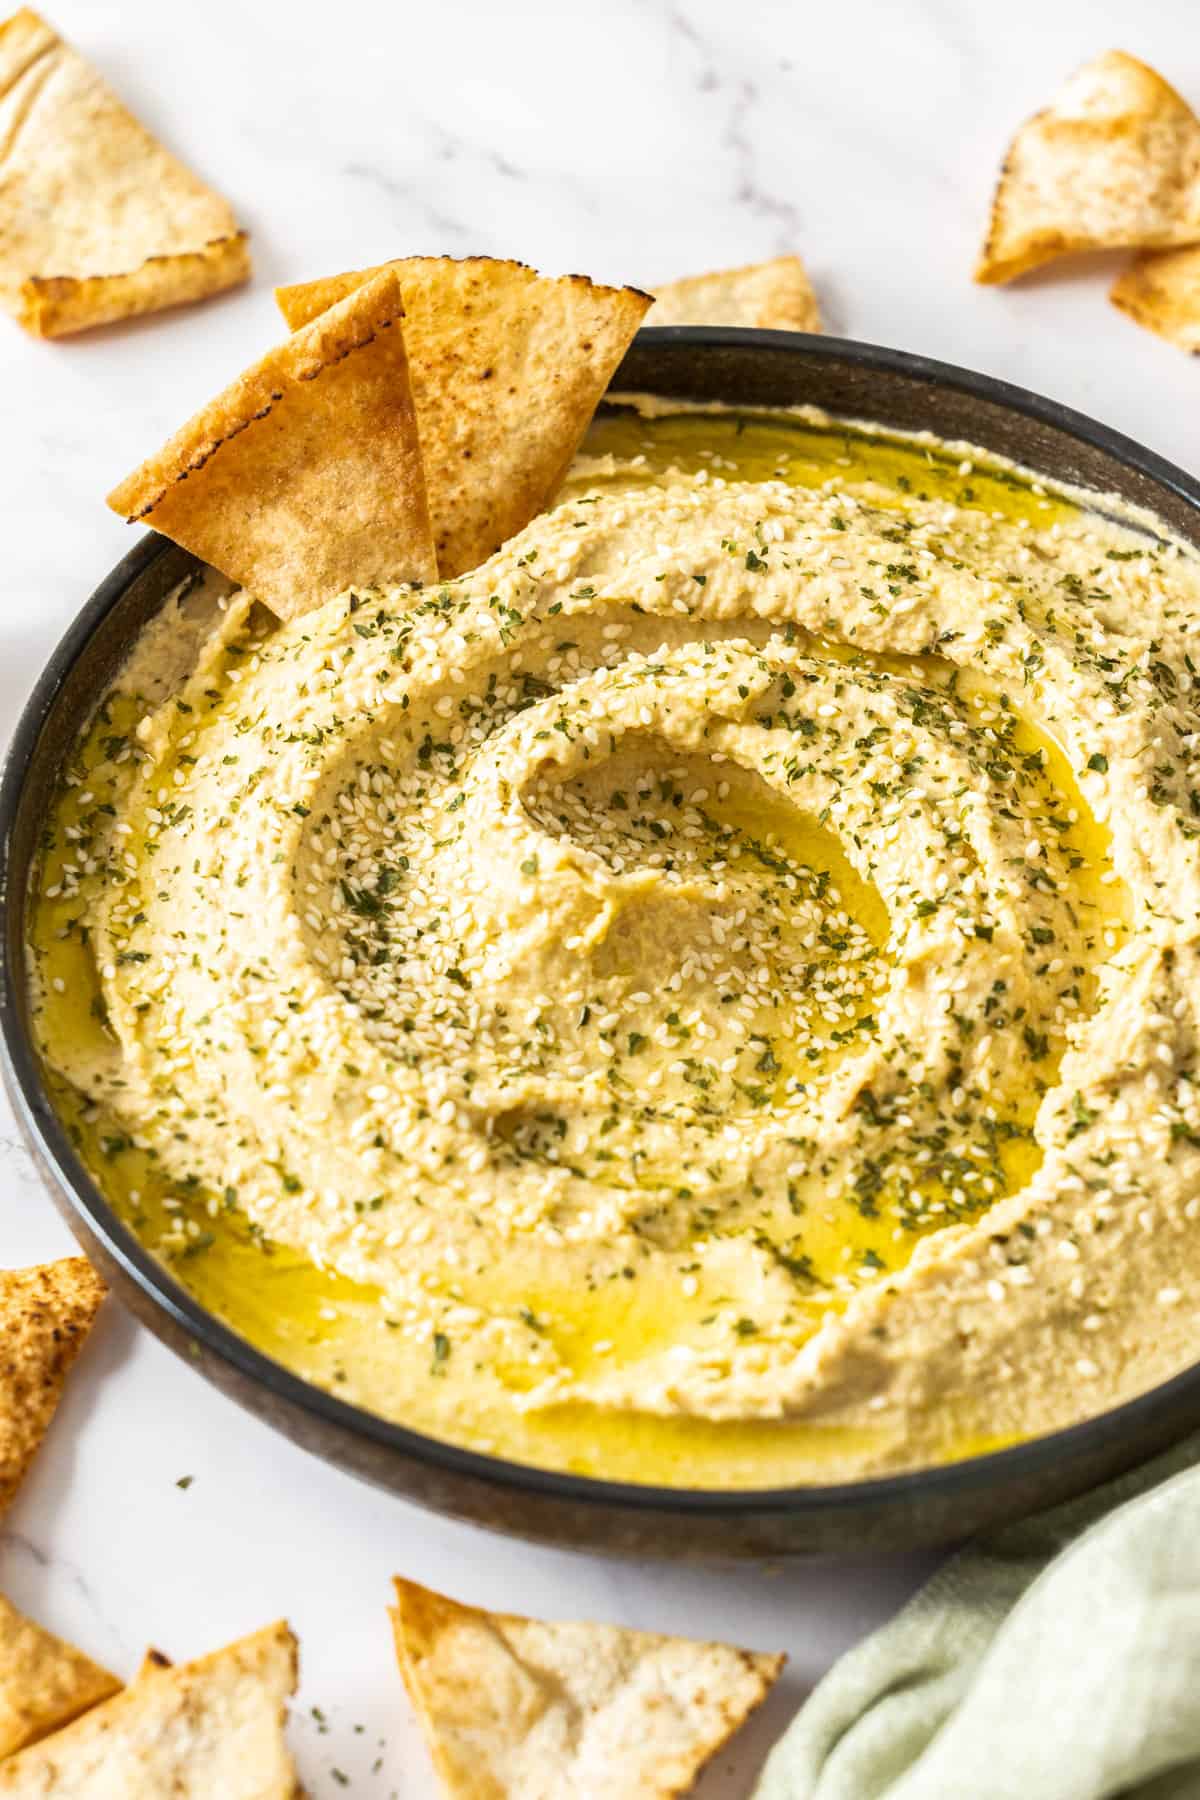 a bowl of chickpea dip with chips.